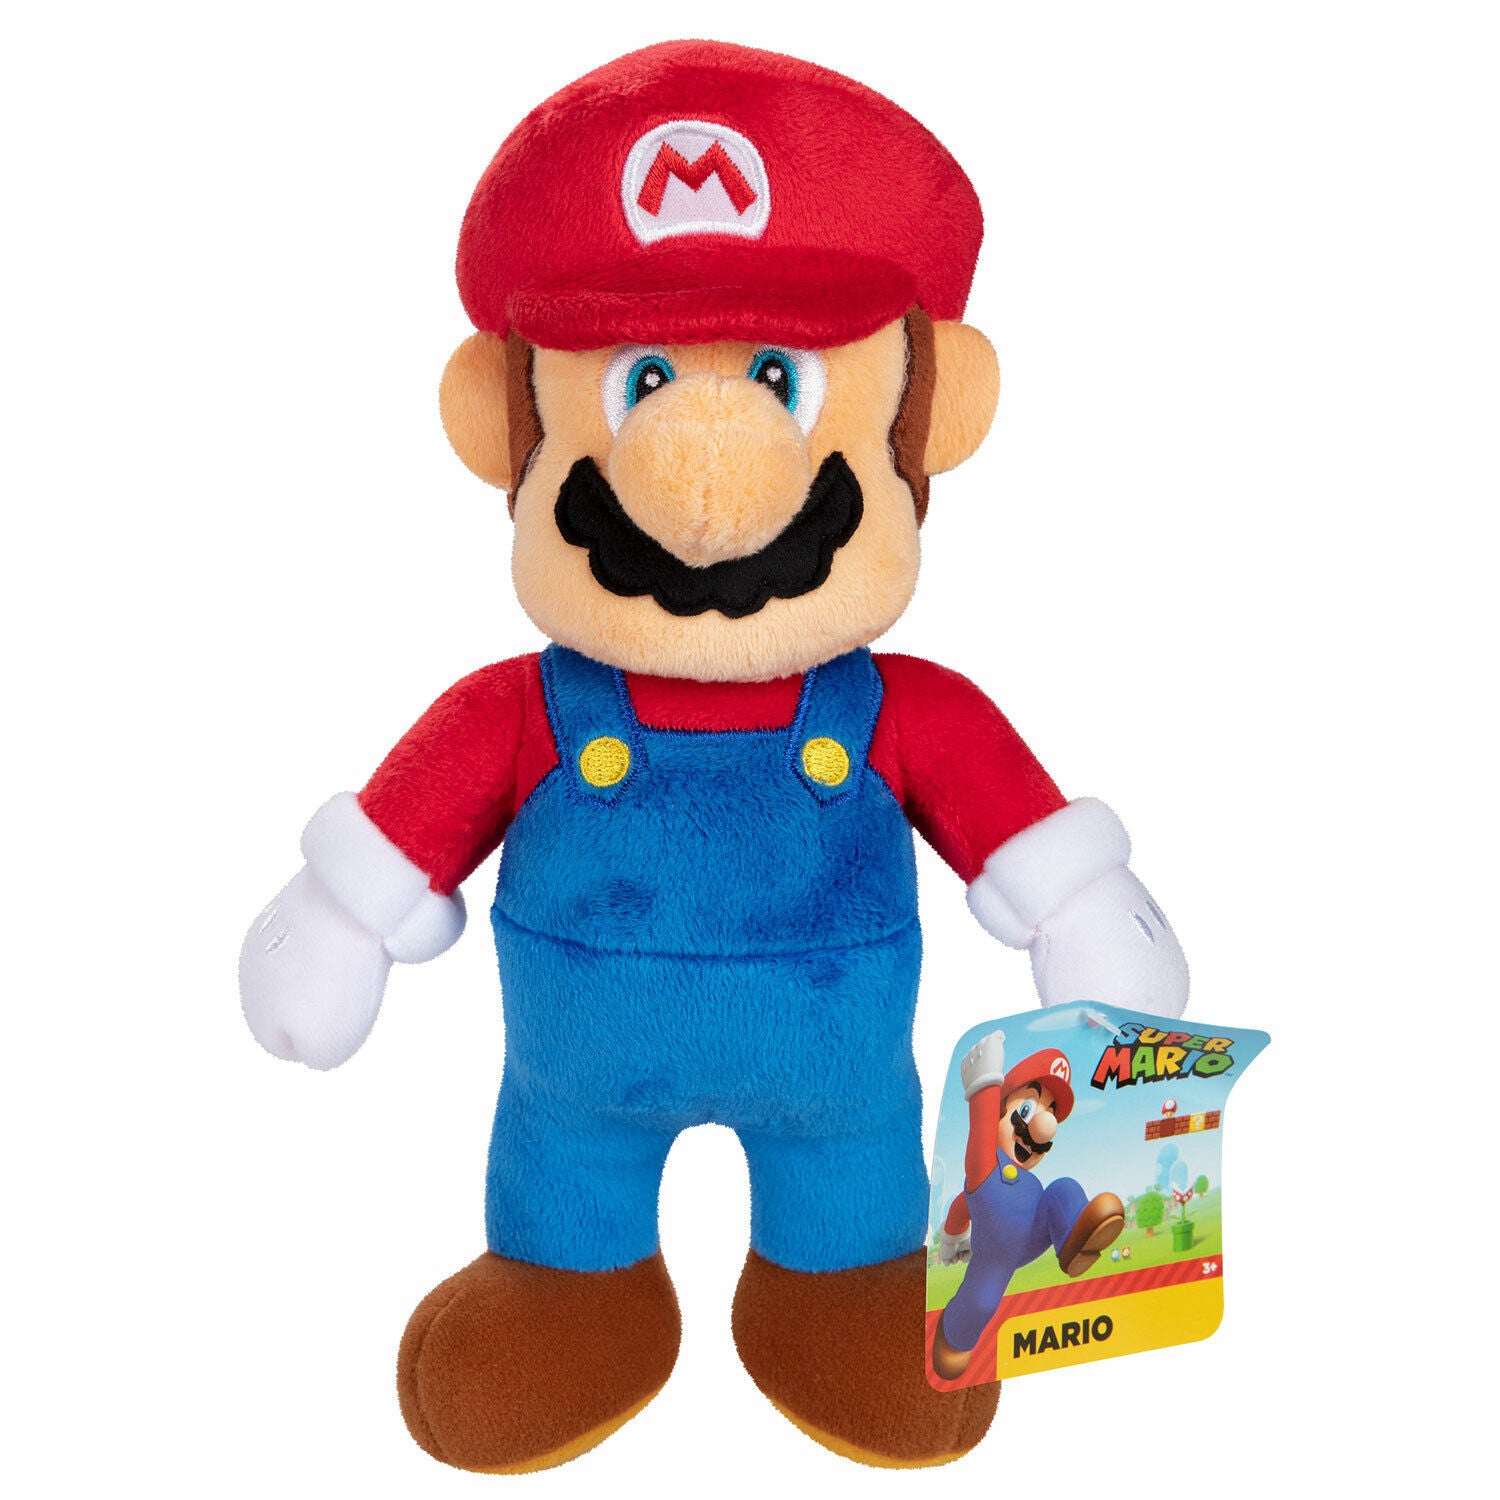 New Super Mario 9-Inch Plush Toy - Must-Have for Fans - Free Shipping